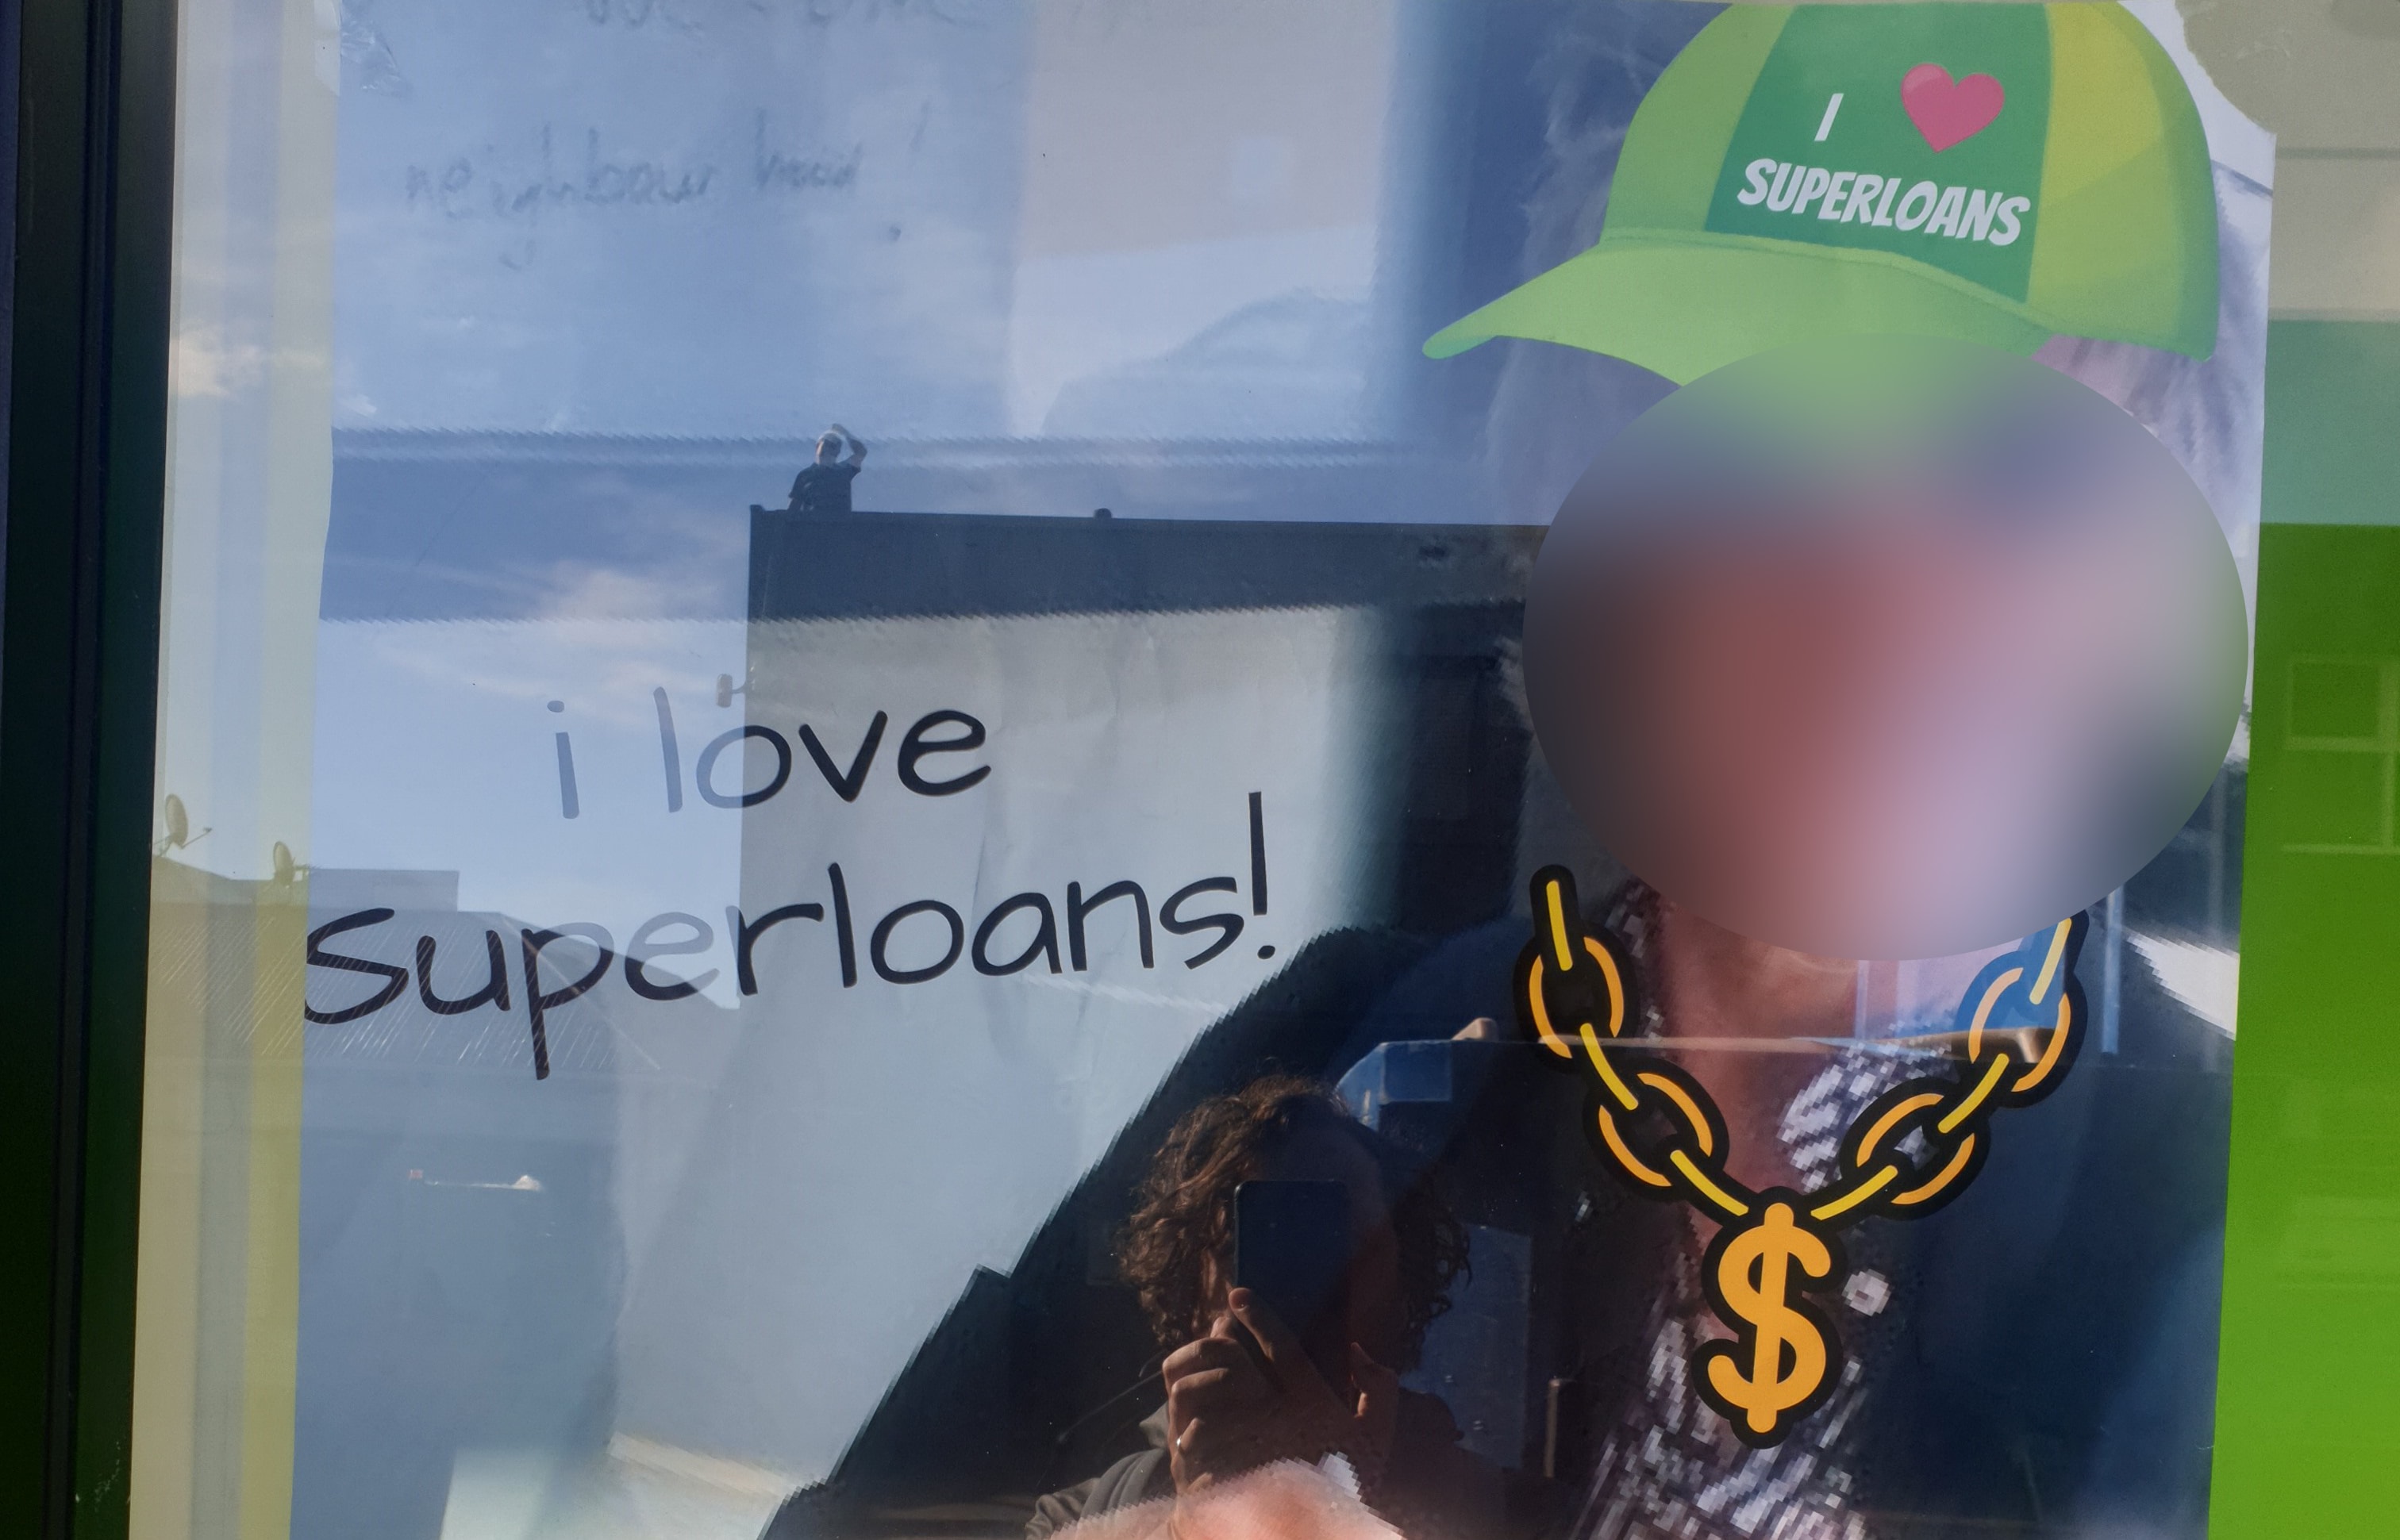 Superloans displayed a photoshopped poster featuring a woman who vandalised their storefront.